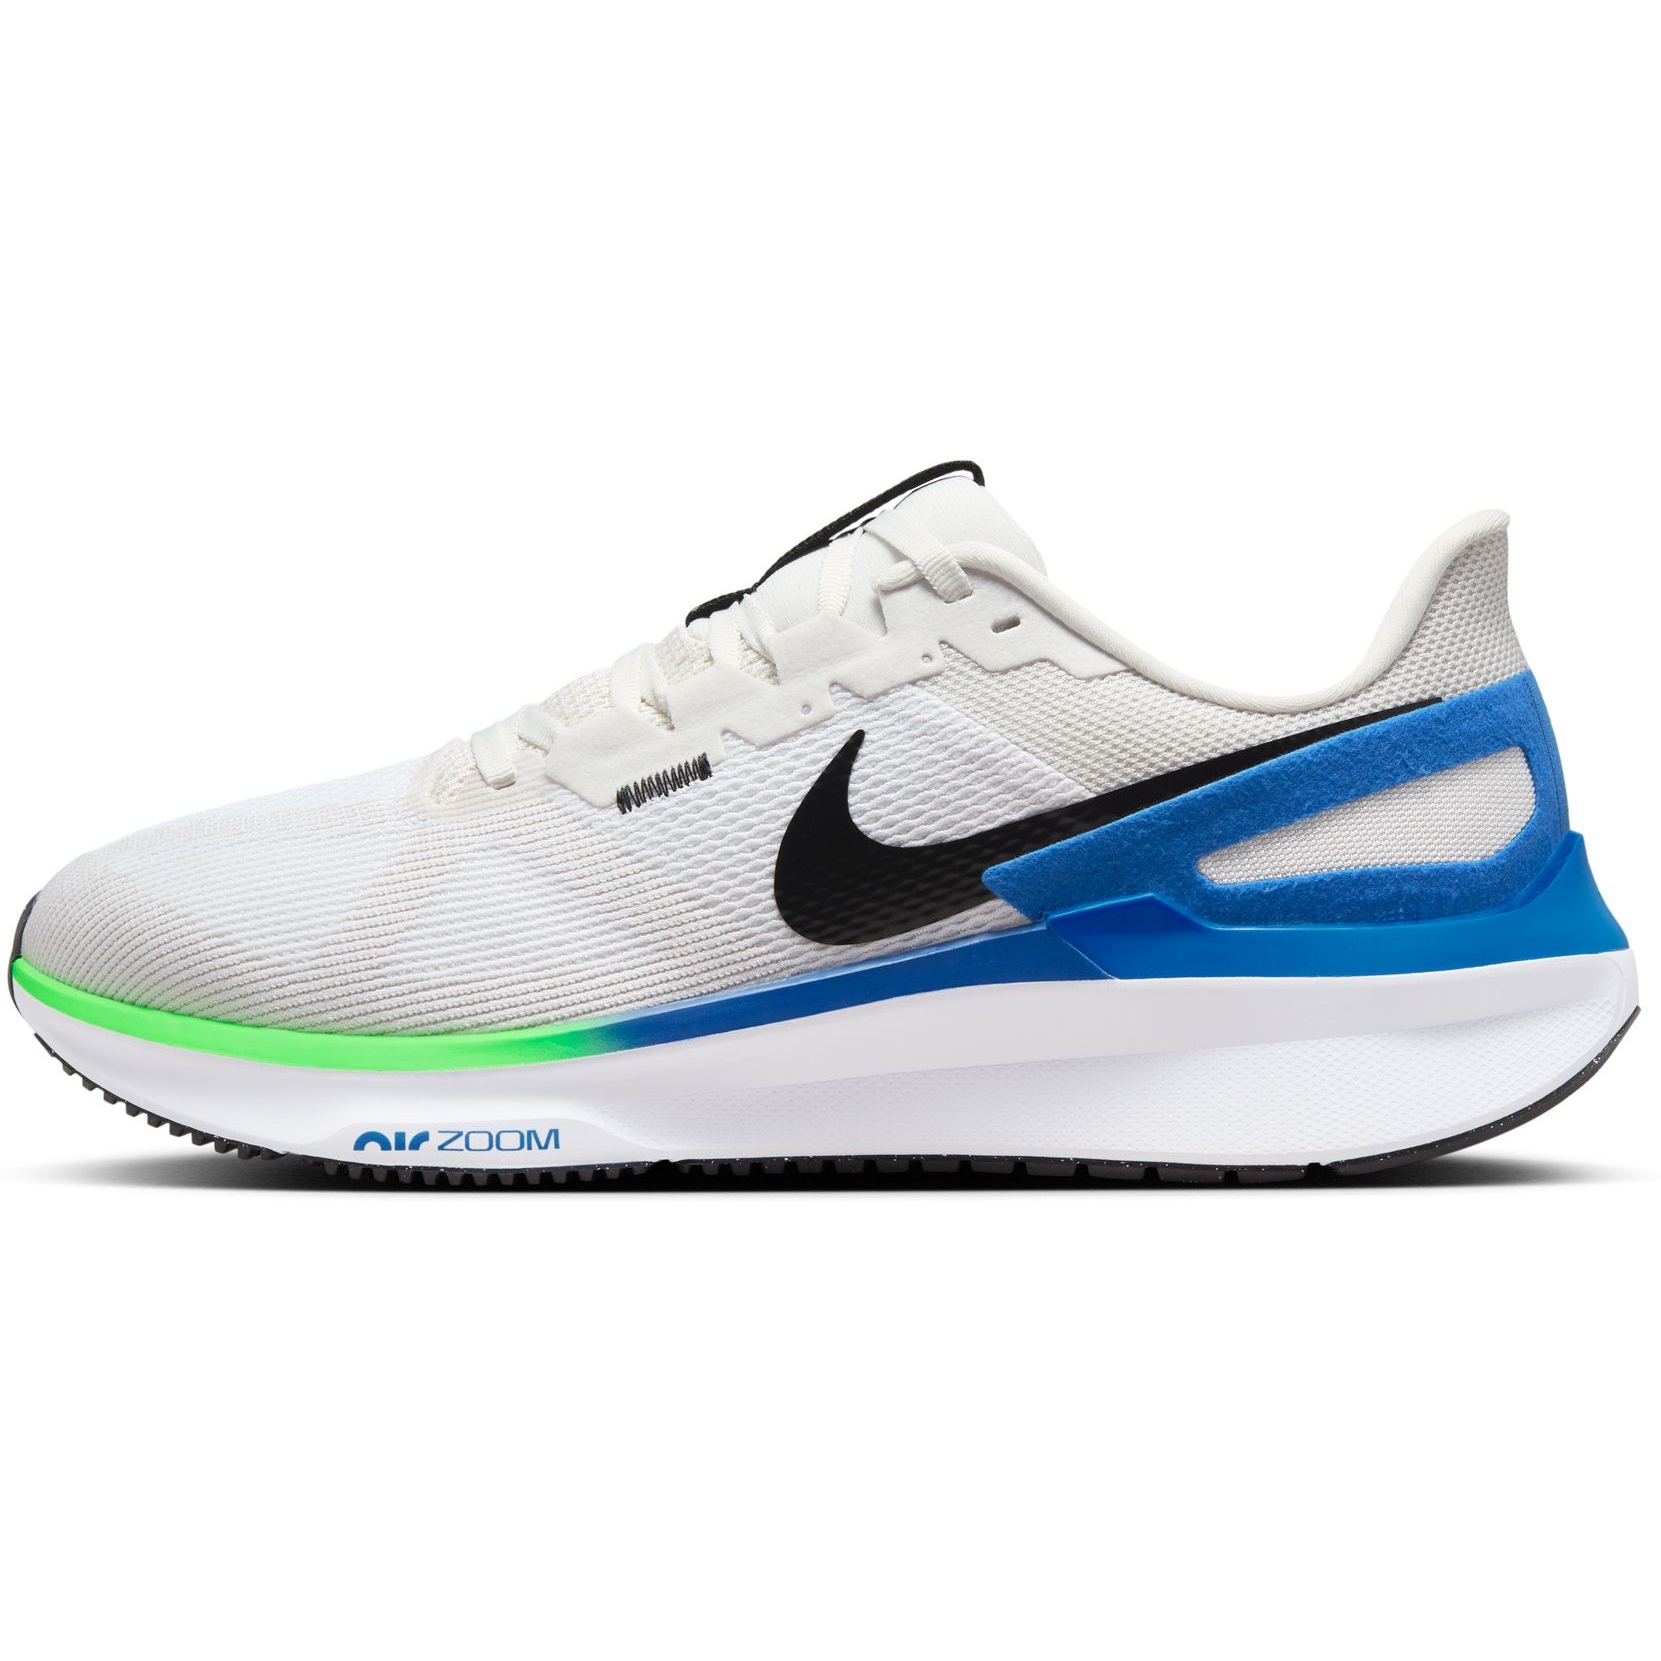 Picture of Nike Structure 25 Running Shoes Men - white/platinum tint/star blue/black DJ7883-104